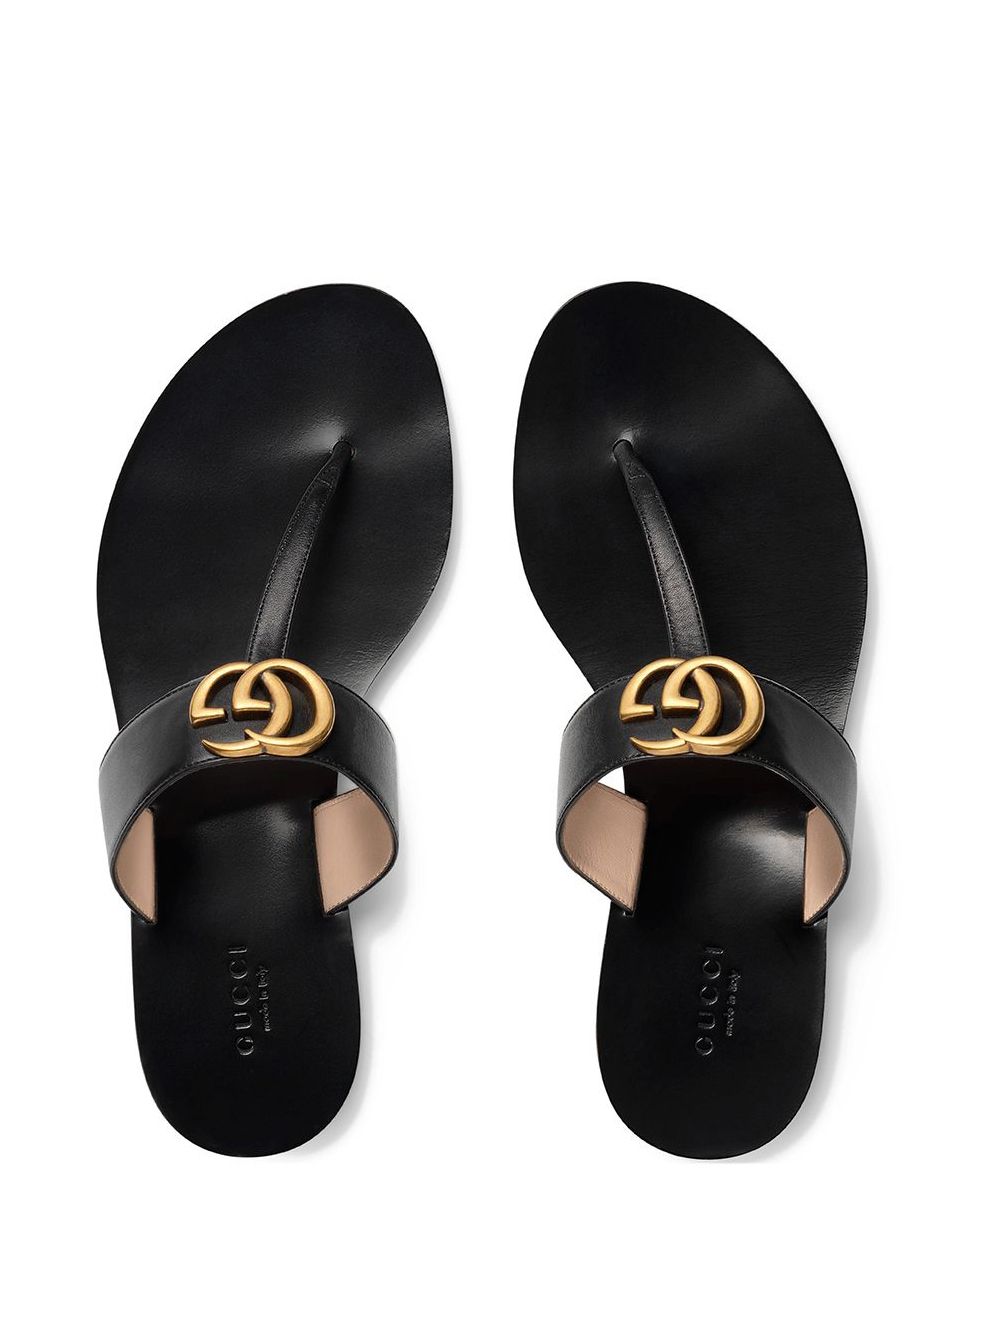 Gucci Women's Marmont Leather Thong Sandals